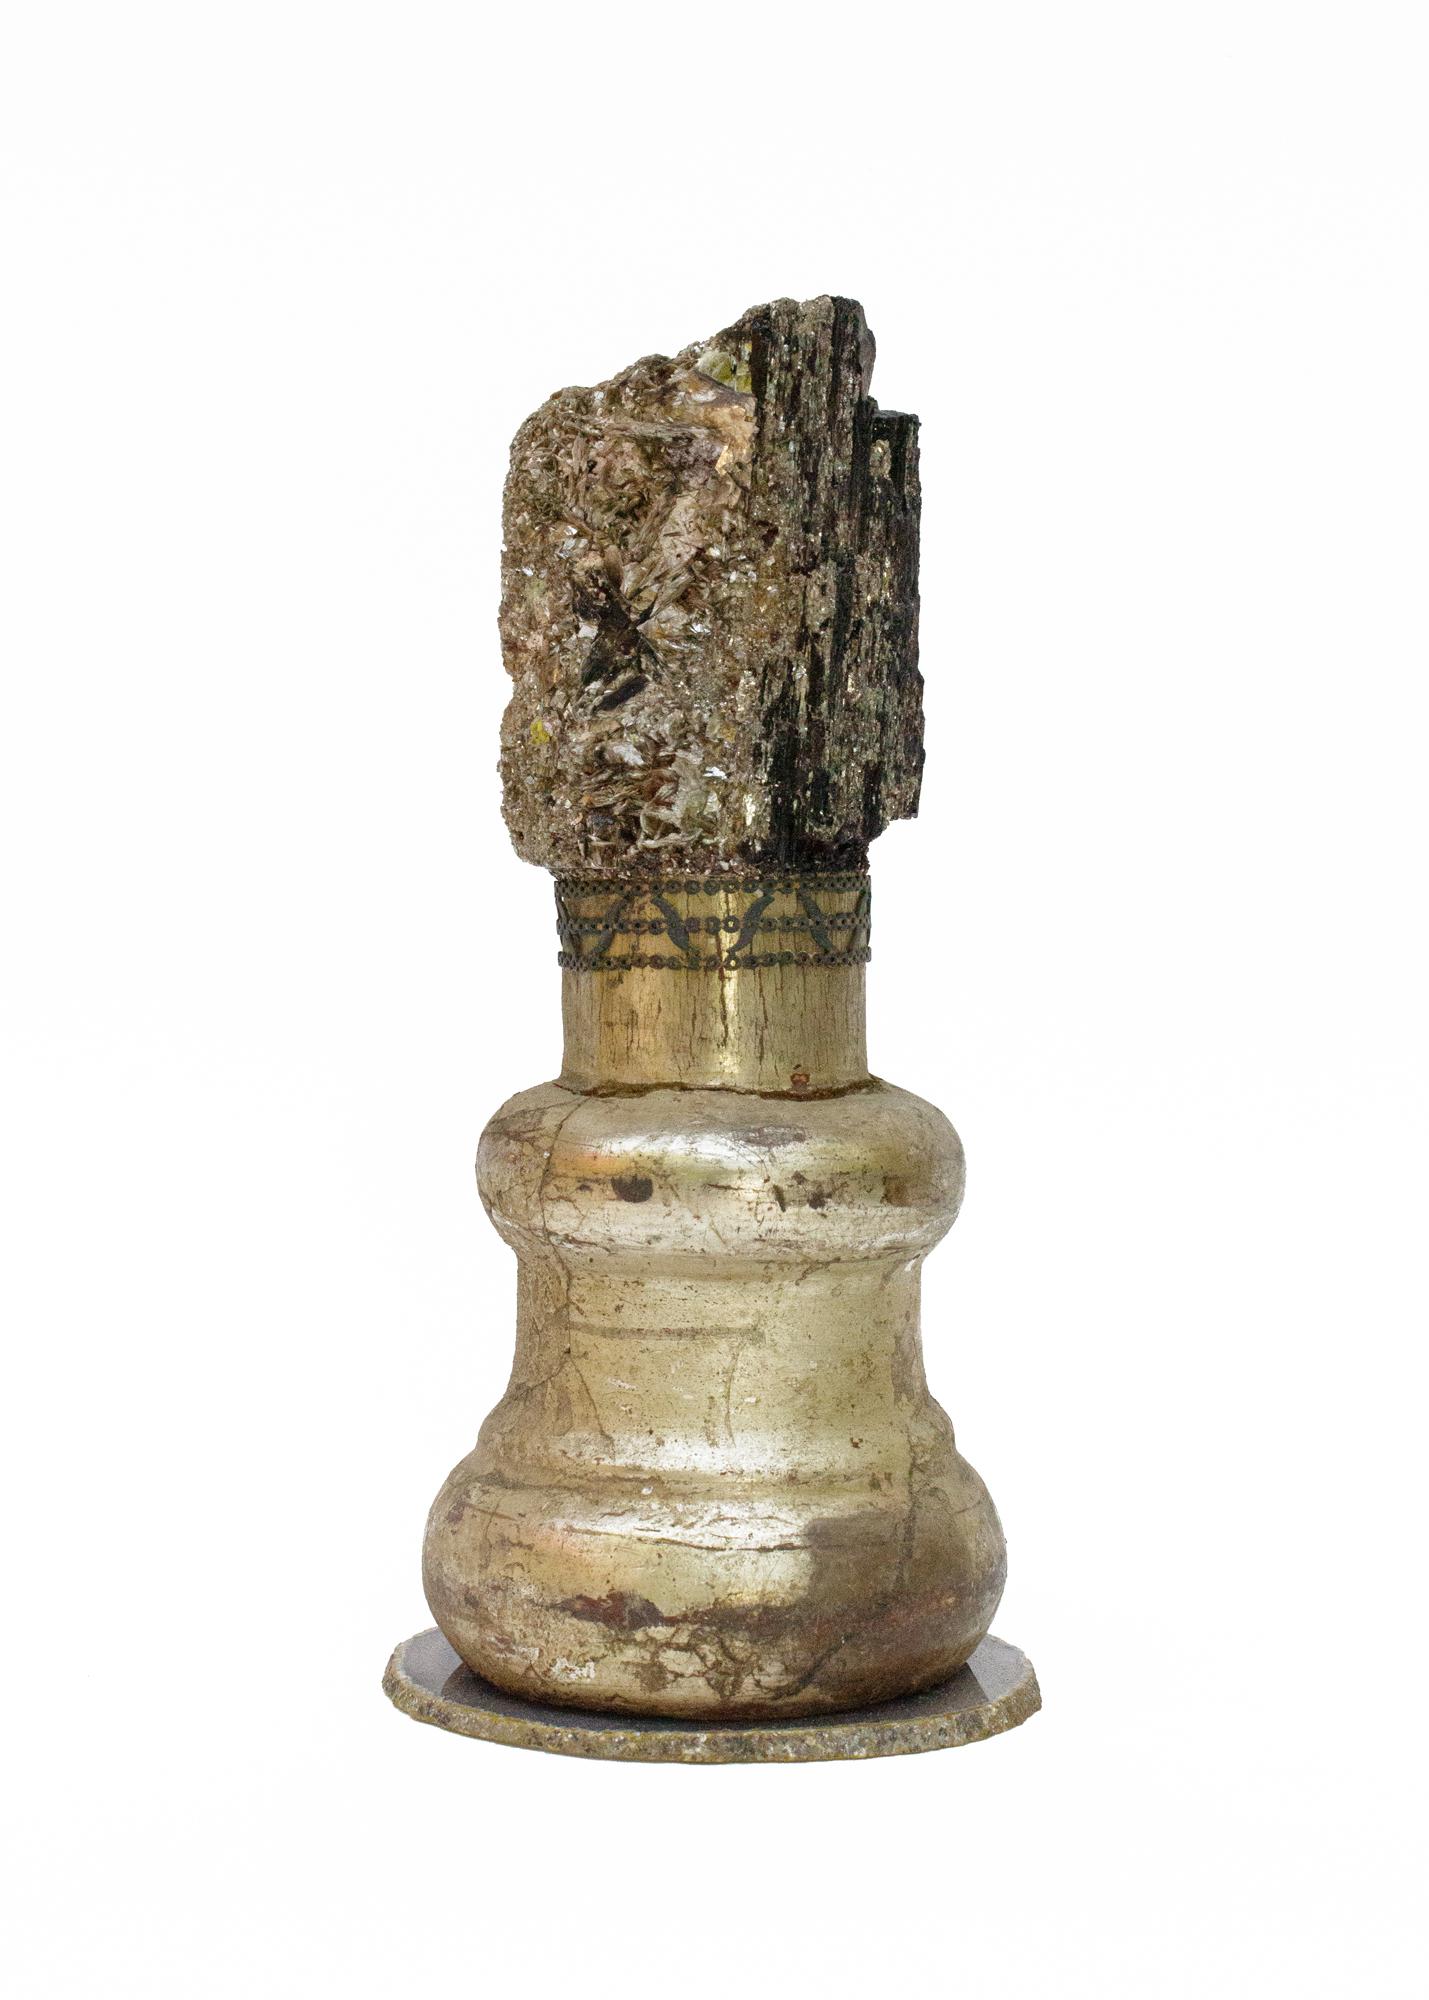 Sculptural 18th century Italian candlestick base with natural-forming mica and tourmaline. The gilded fragment base was originally part of a candlestick in a historical Italian church in Italy. The piece is accented with an 18th century French metal